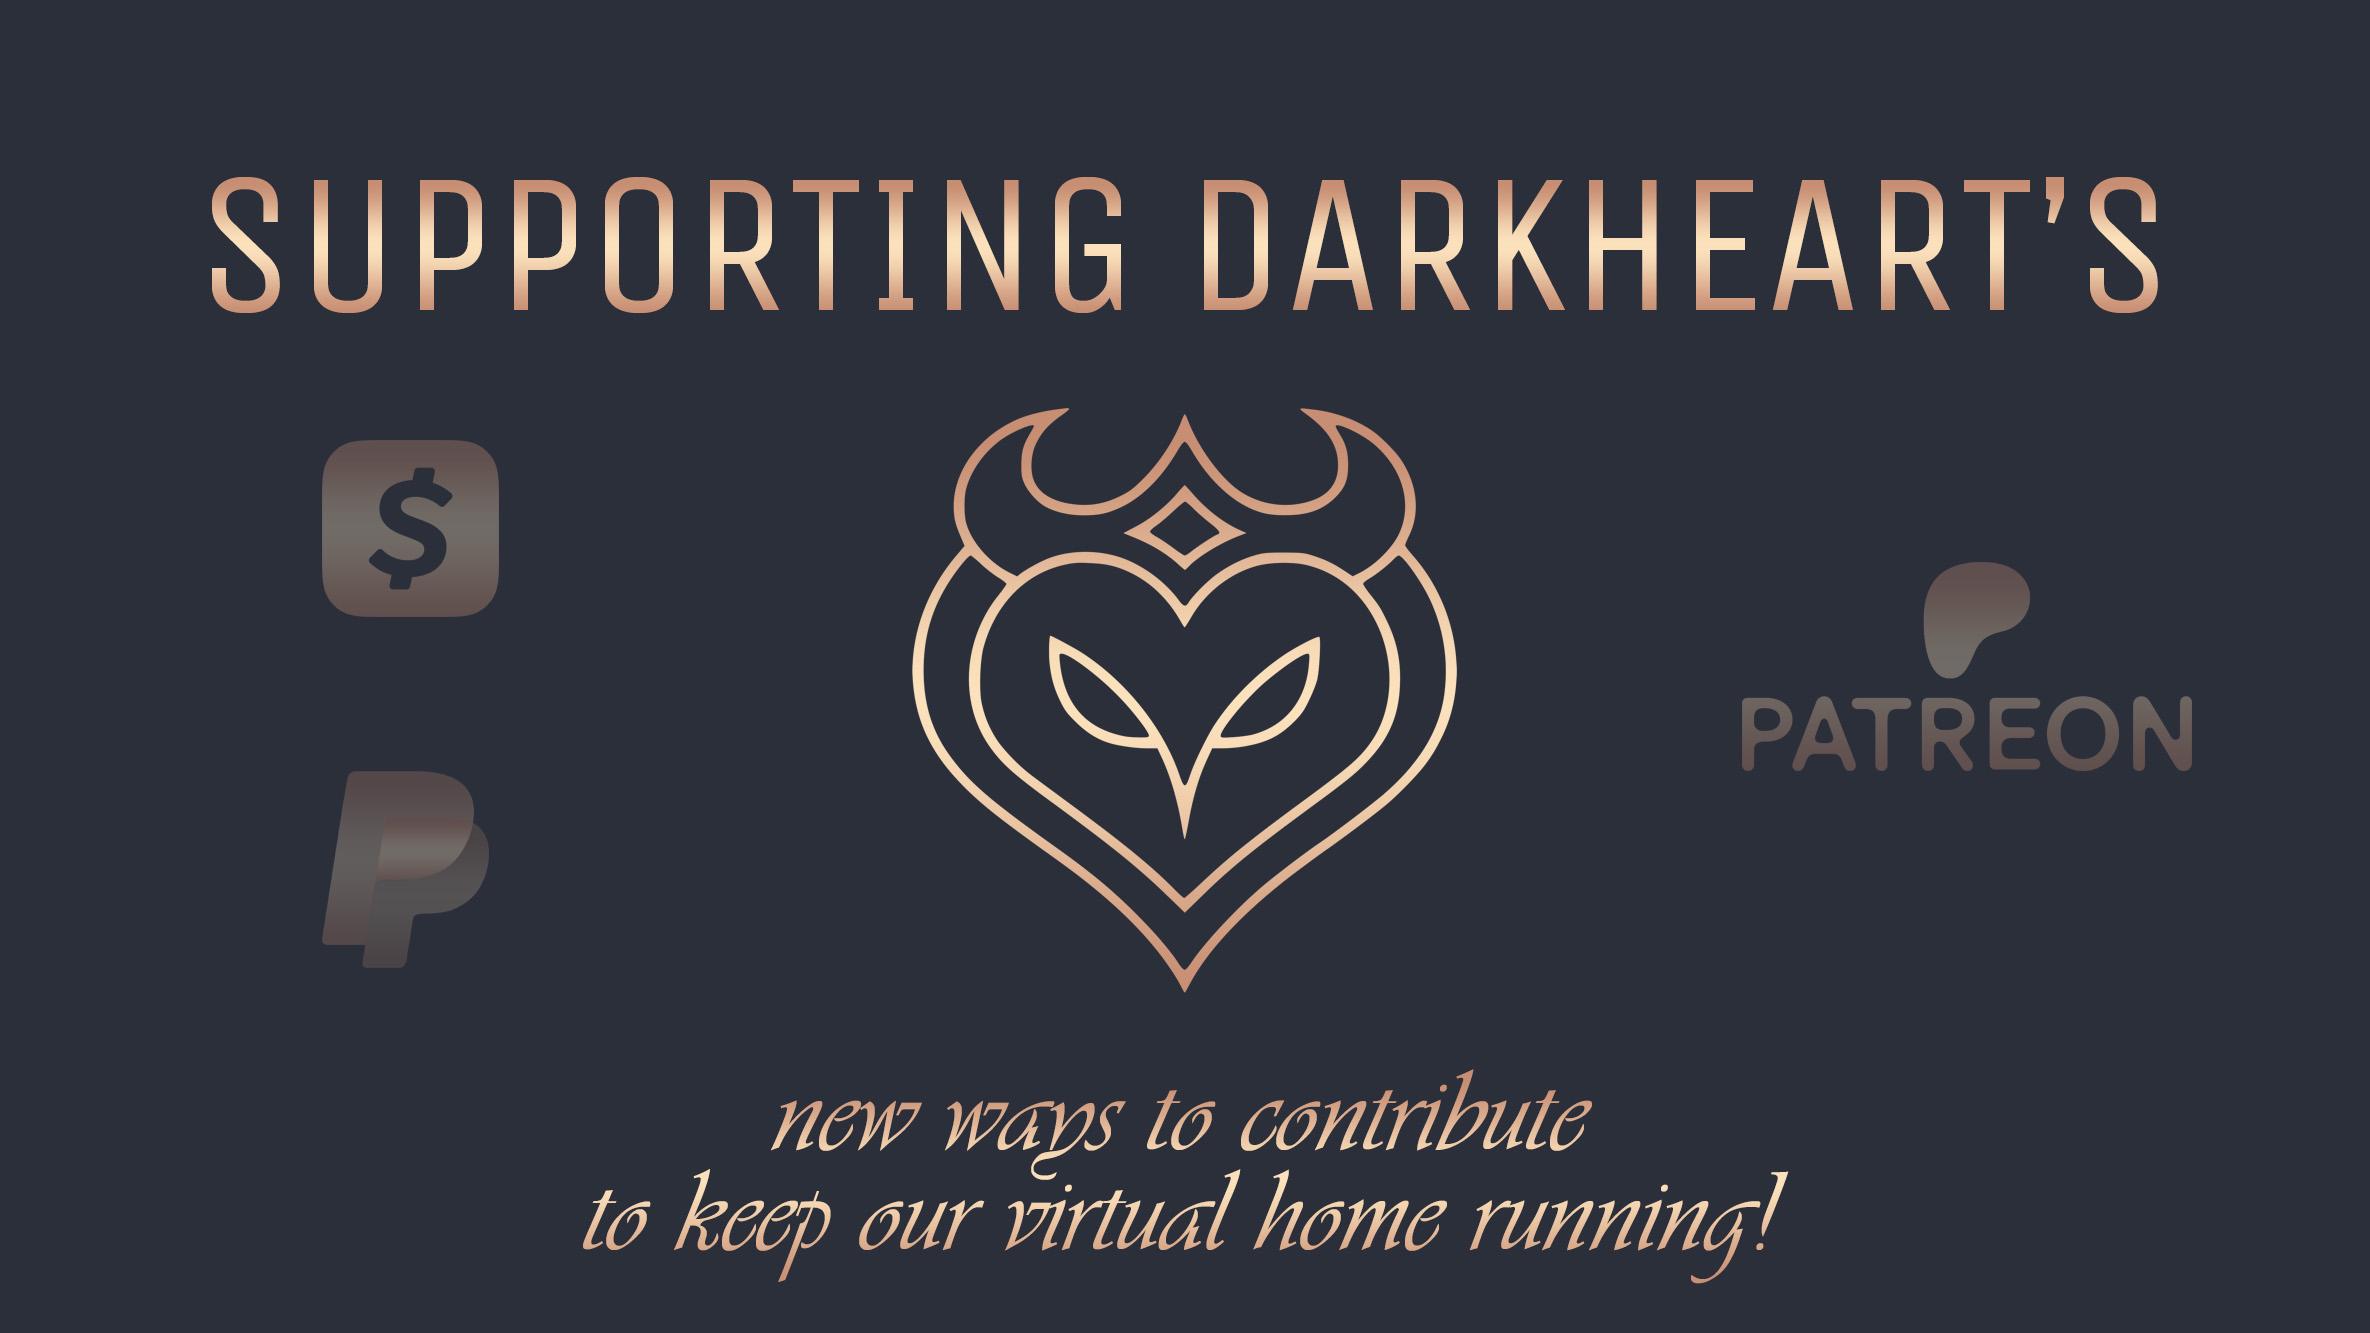 New ways to support Darkhearts